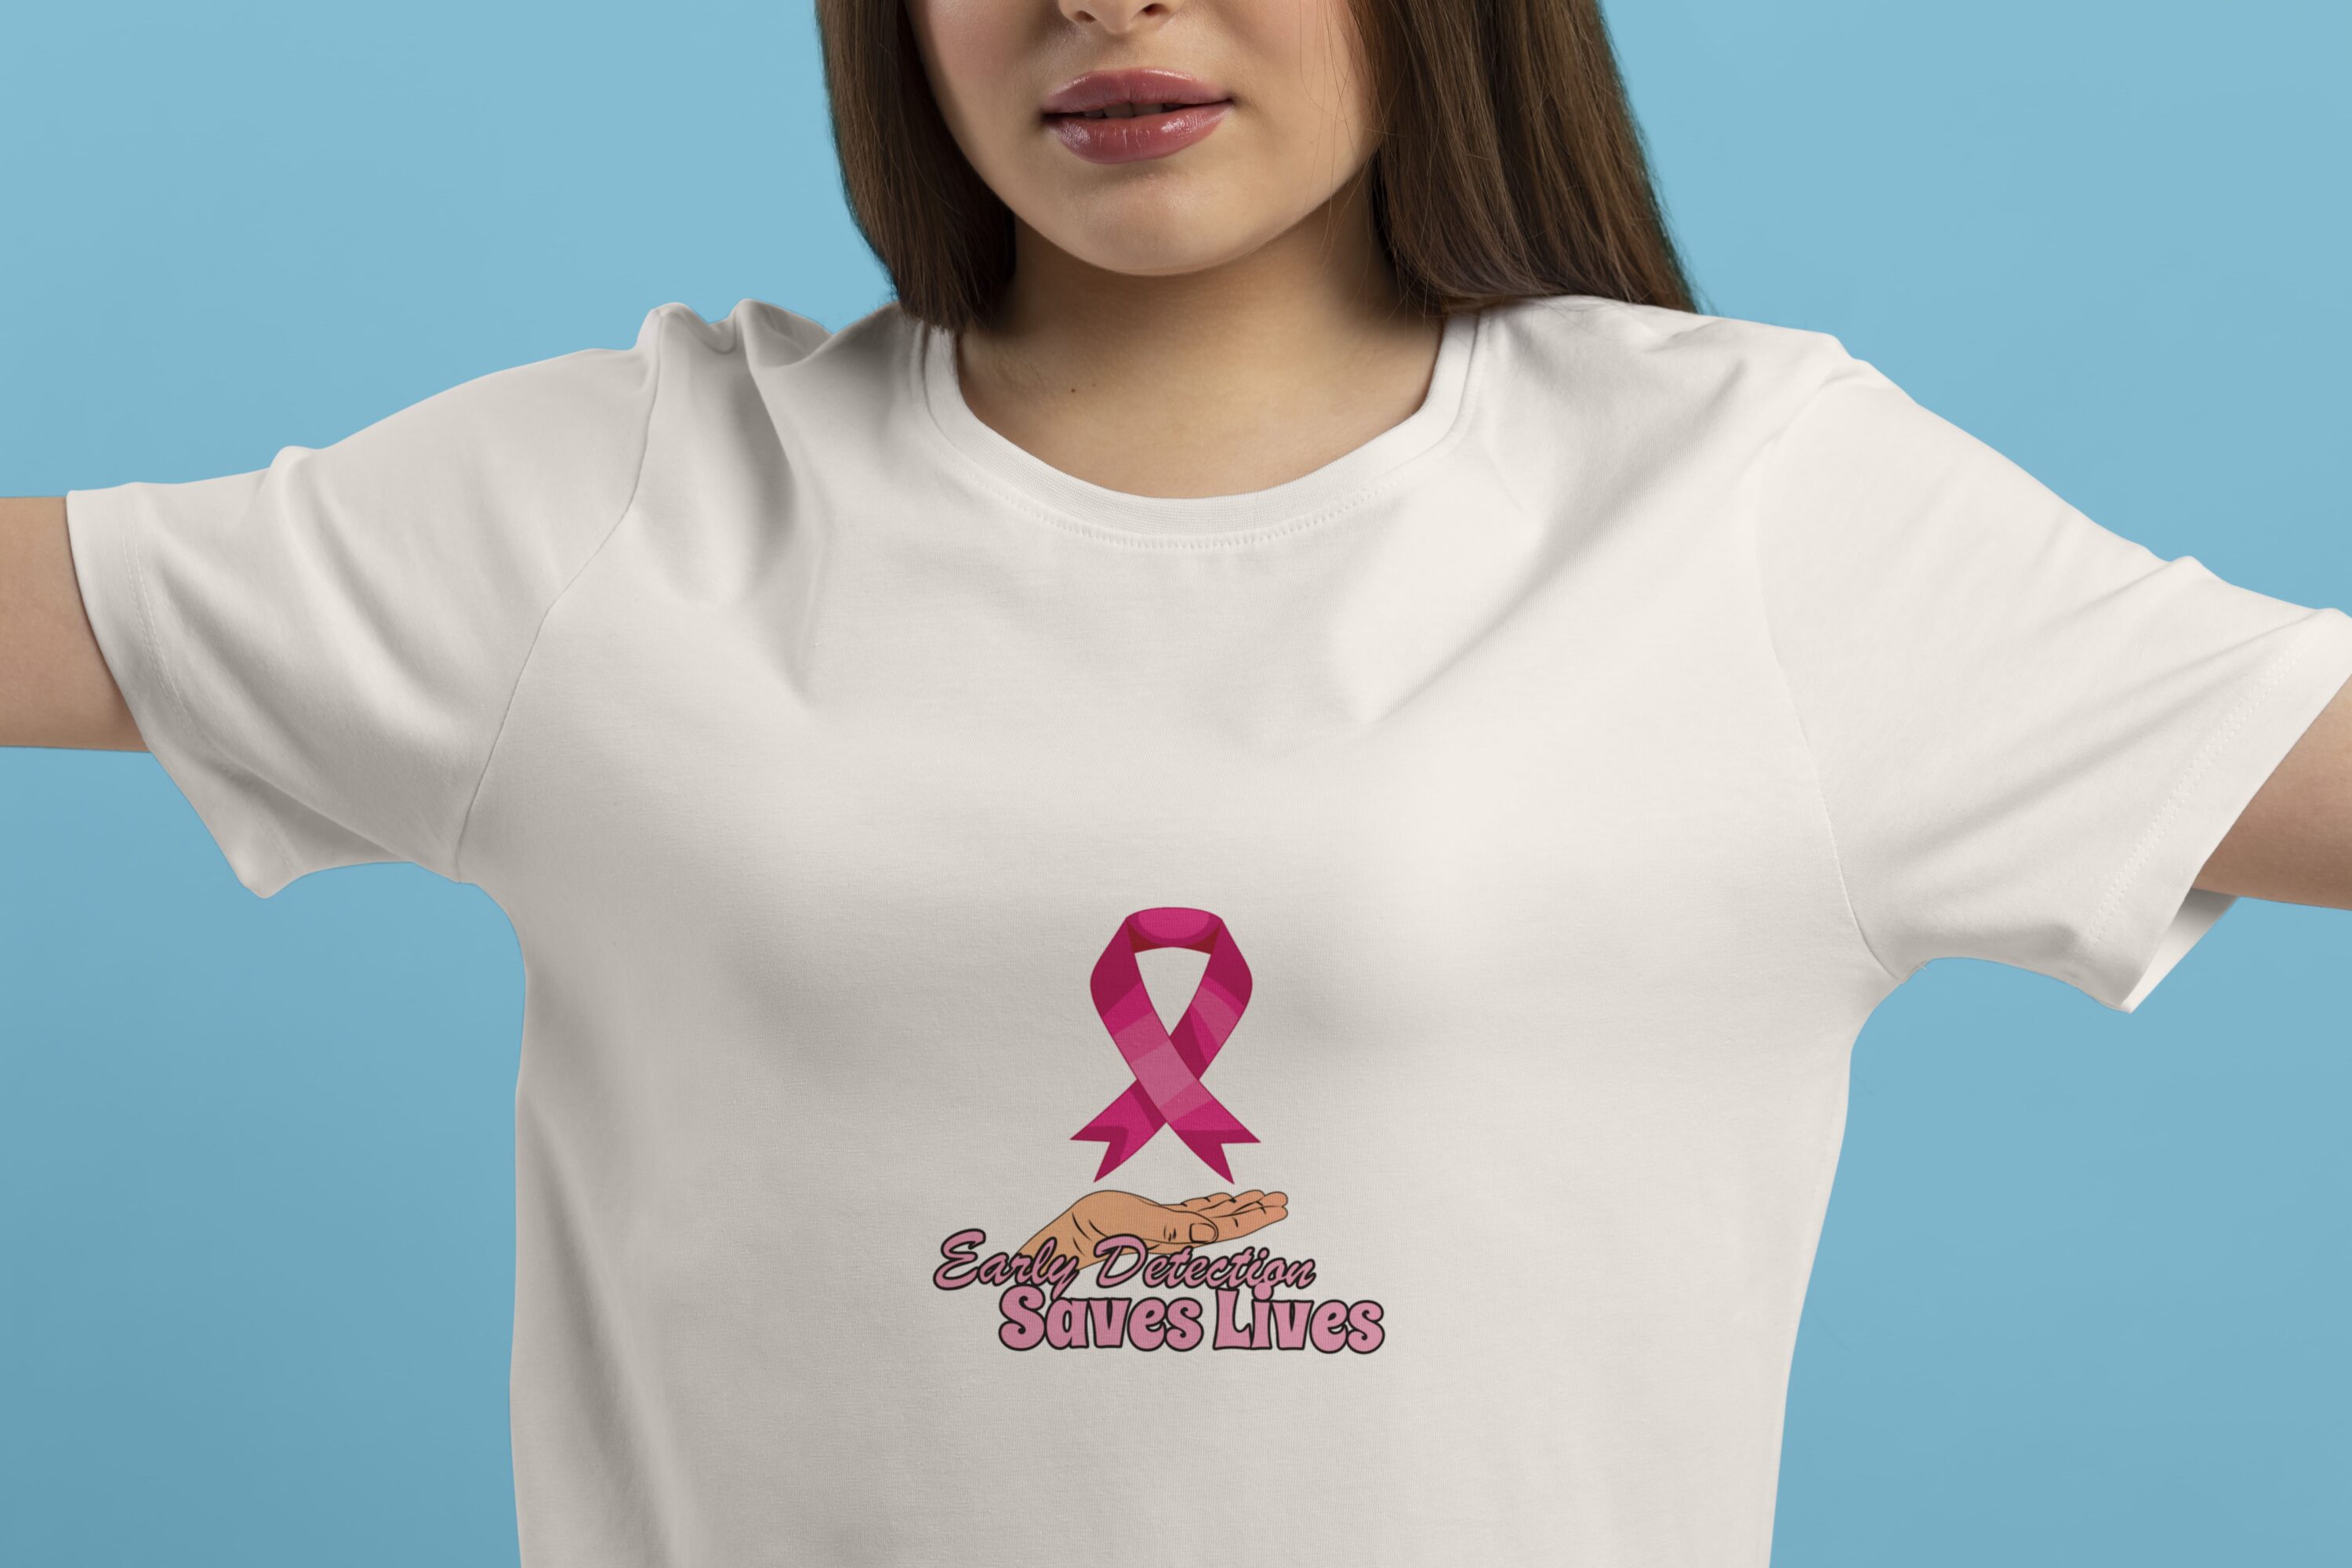 Classic pink breast cancer ribbon on a white t-shirt.